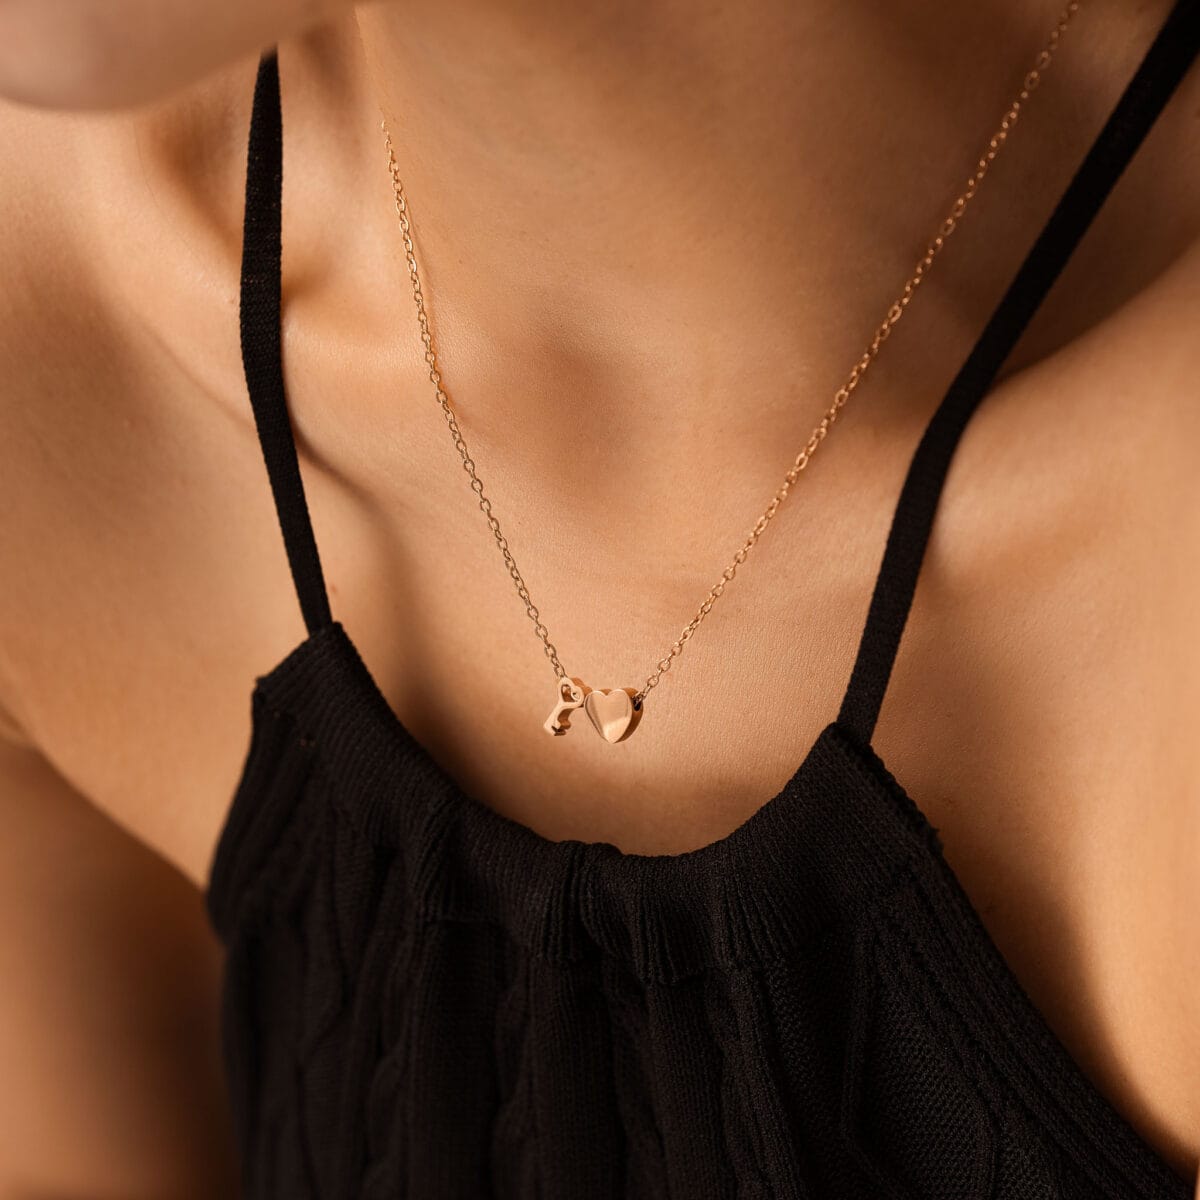 https://m.clubbella.co/product/key-to-thee-heart-rose-gold-charm-necklace/ Key to Thee Rose Gold Charm Necklace (2)